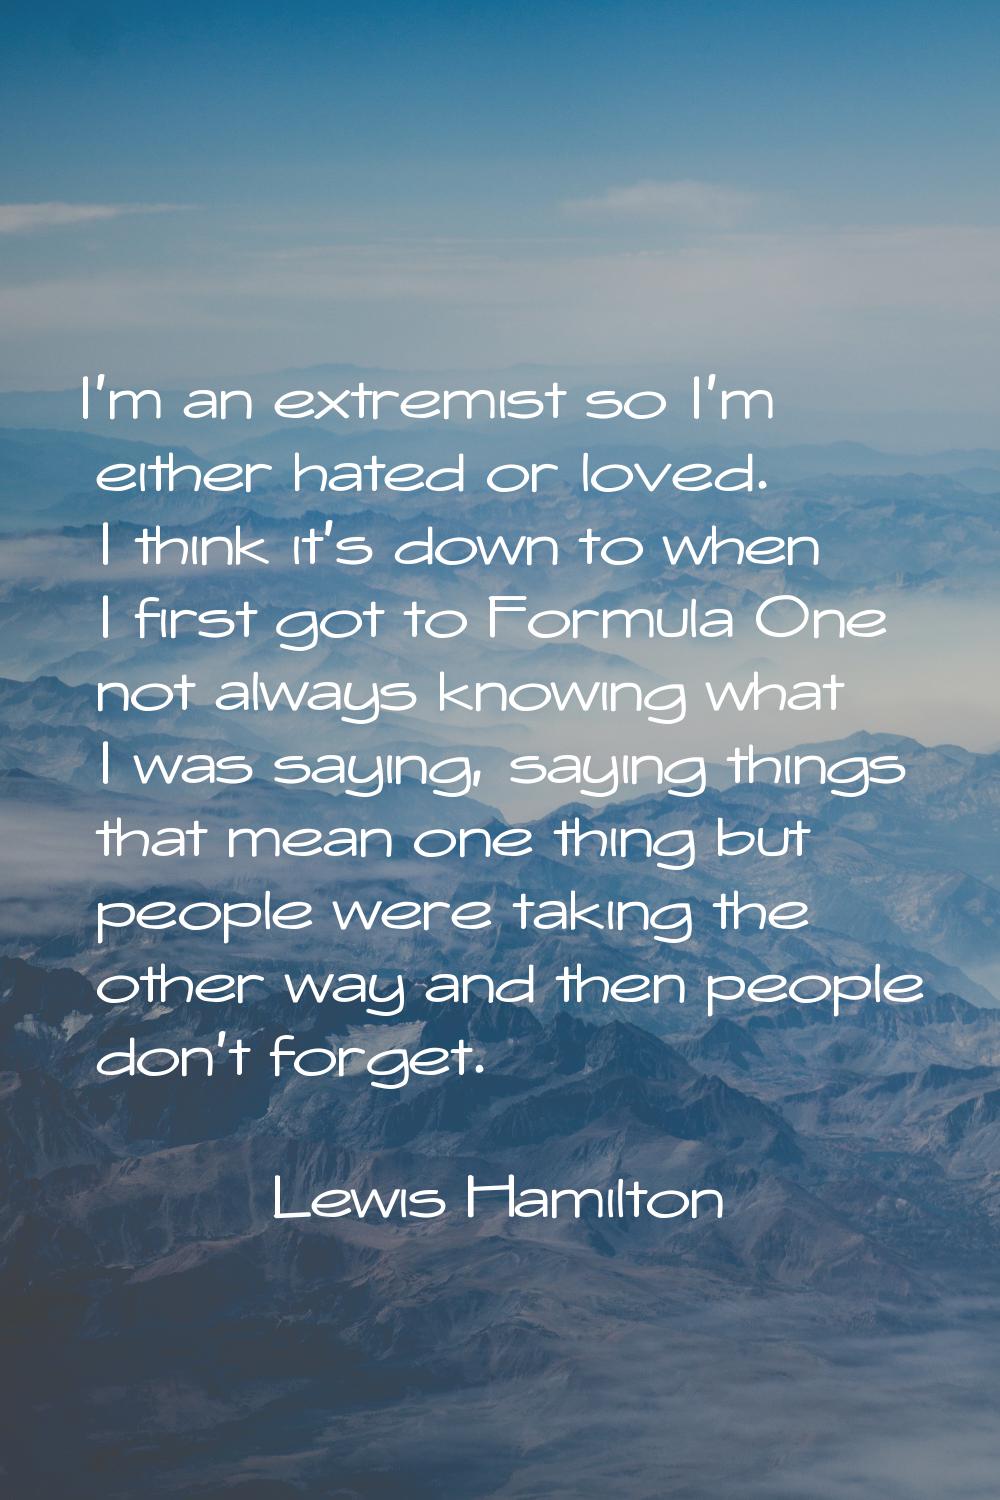 I'm an extremist so I'm either hated or loved. I think it's down to when I first got to Formula One